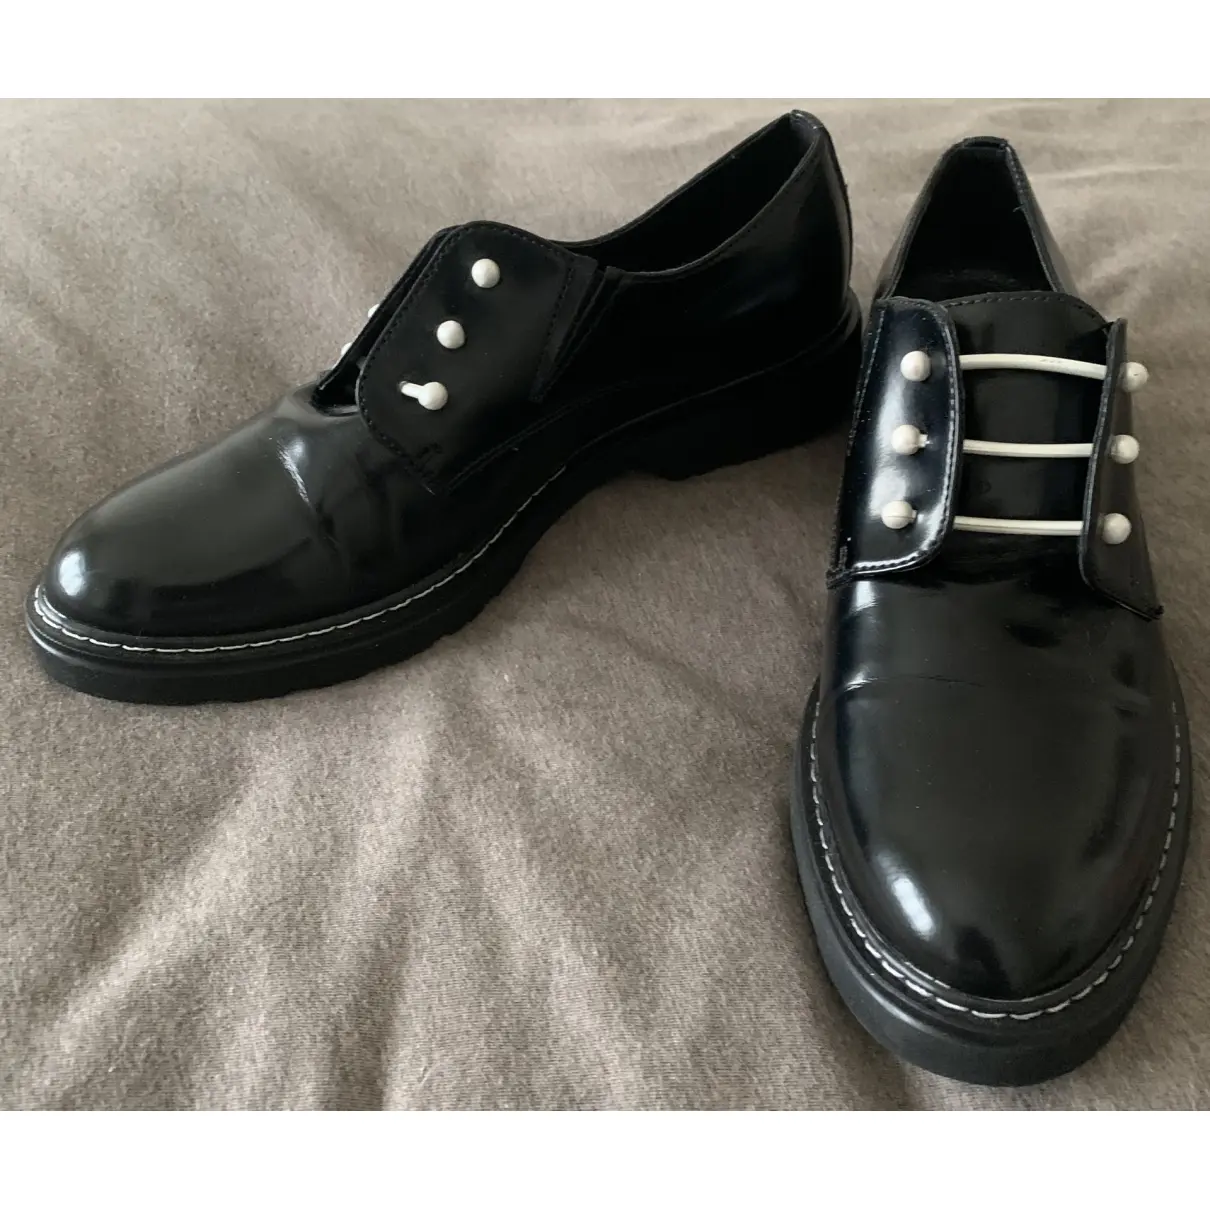 Buy Cult Form Patent leather flats online